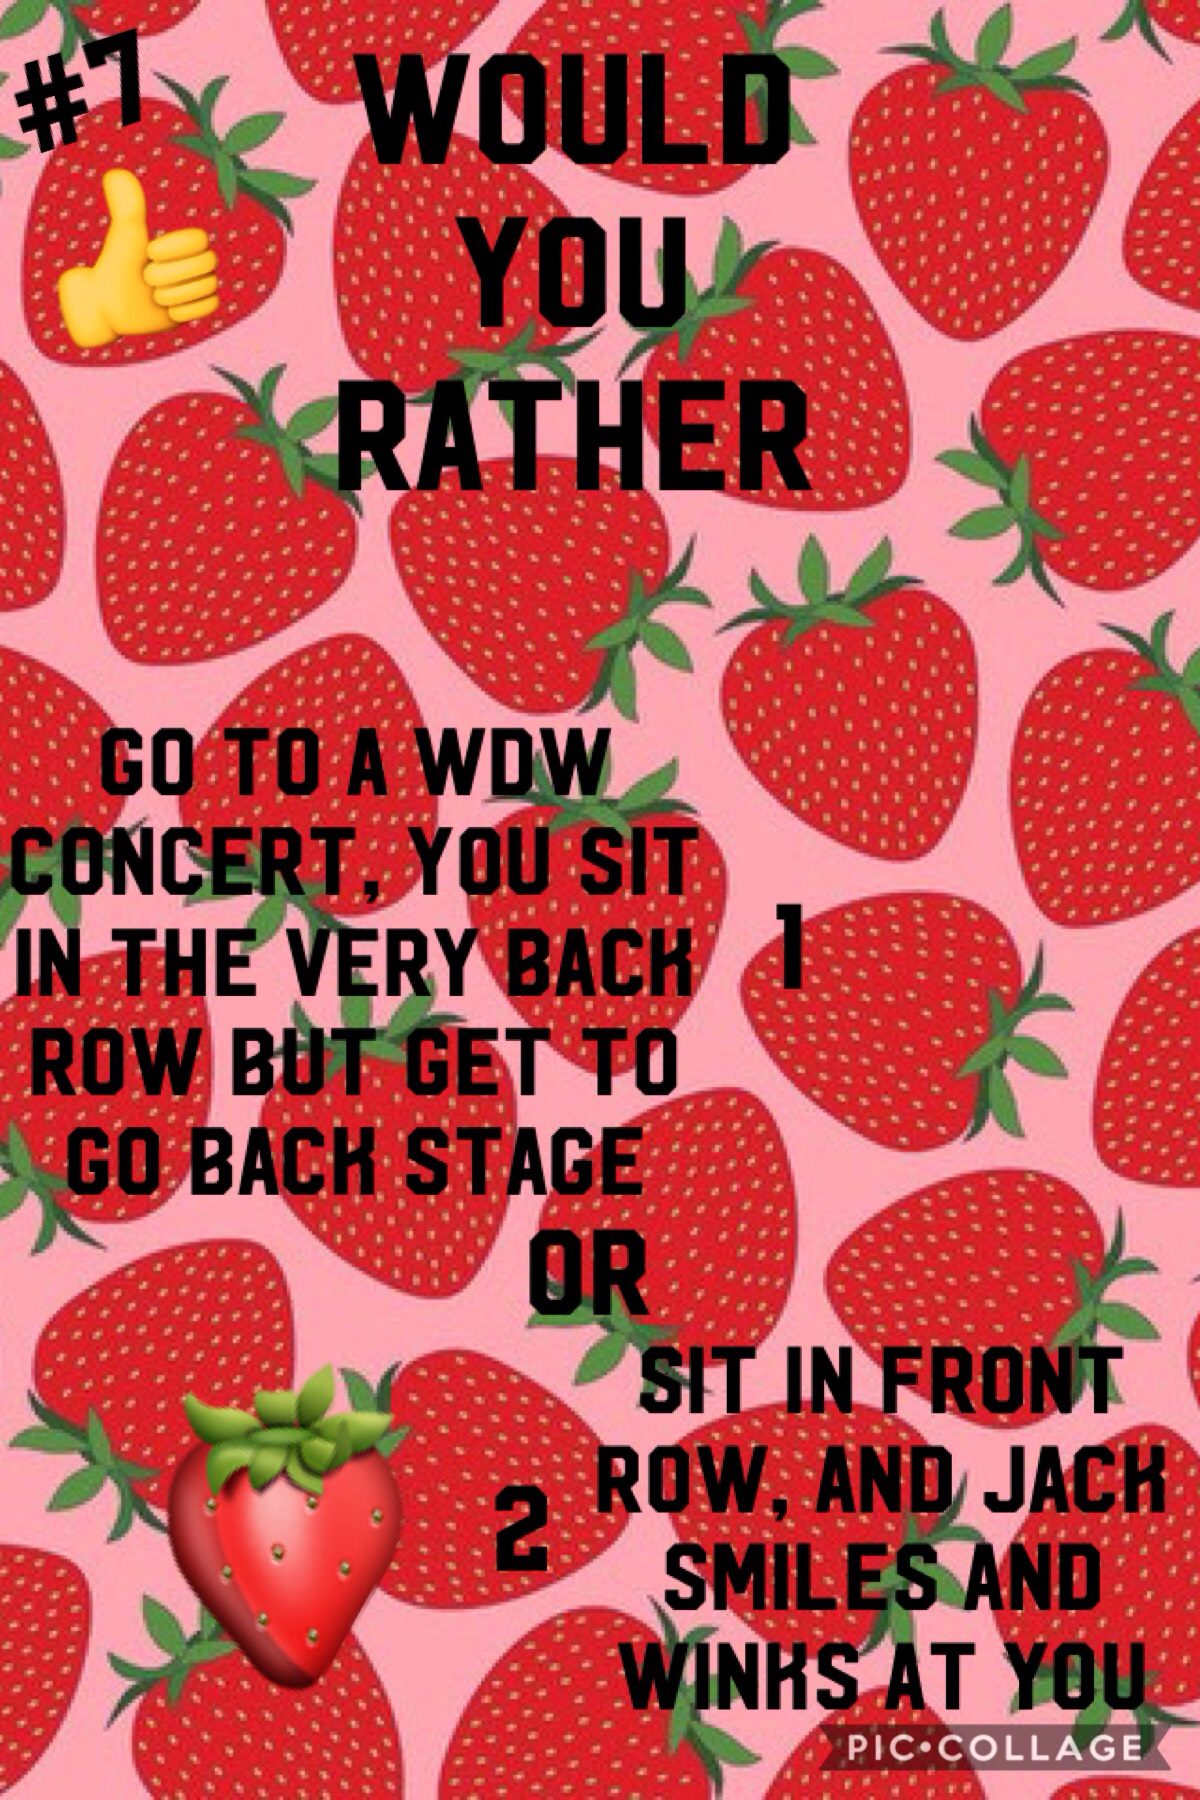 🍓Tap🍓

My opinion would be #1, or #2.
You know what, I can't answer this one... Lol❤️❤️🍓🍓